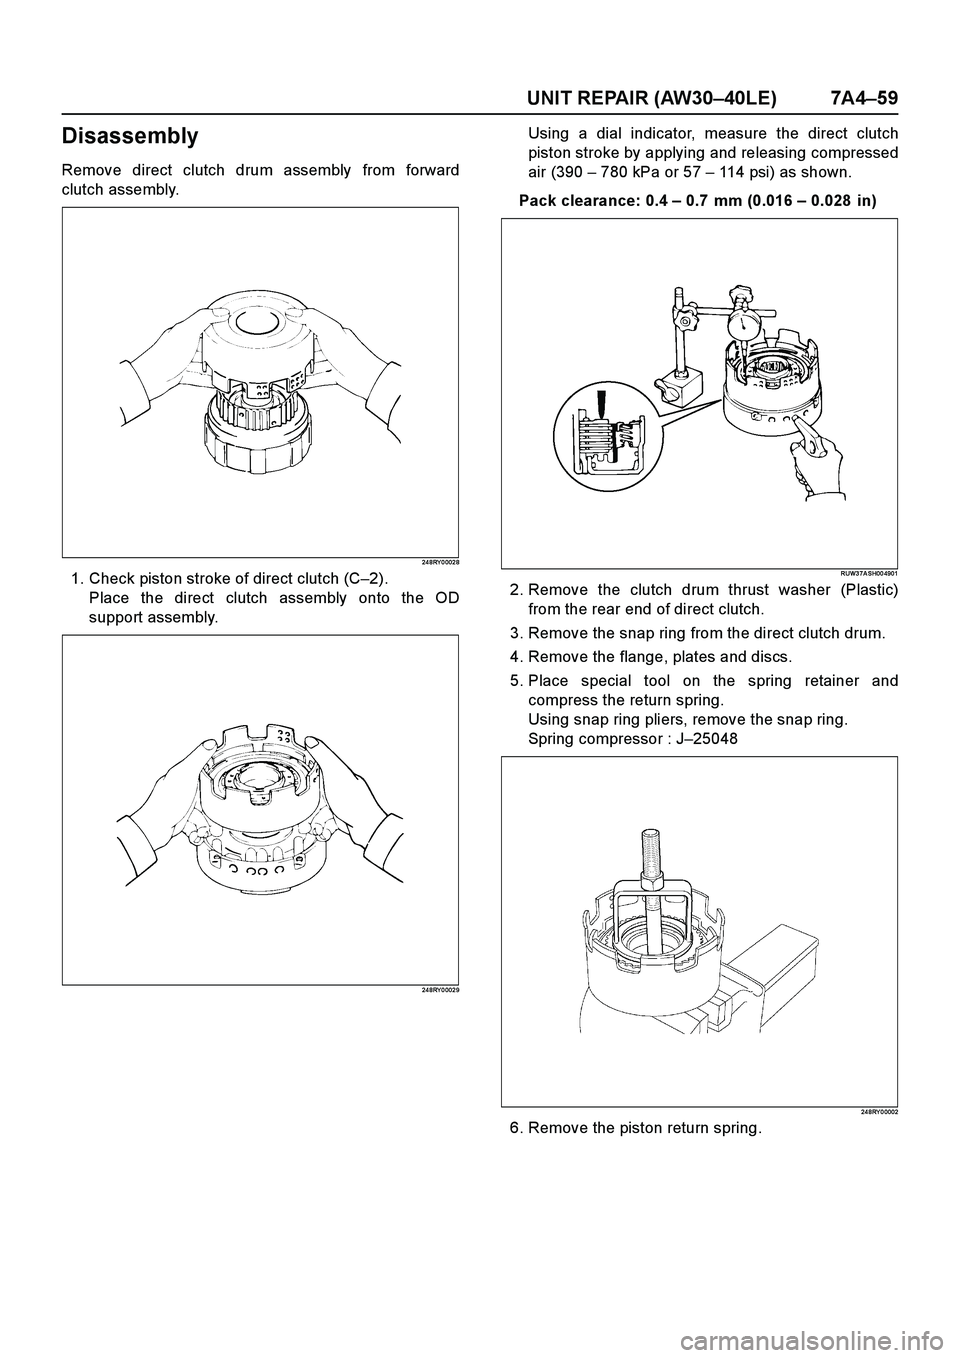 ISUZU TF SERIES 2004  Workshop Manual UNIT REPAIR (AW30–40LE) 7A4–59
Disassembly
Remove direct clutch drum assembly from forward
clutch assembly.
24 8RY 0 002 8
1. Check piston stroke of direct clutch (C–2).
Place the direct clutch 